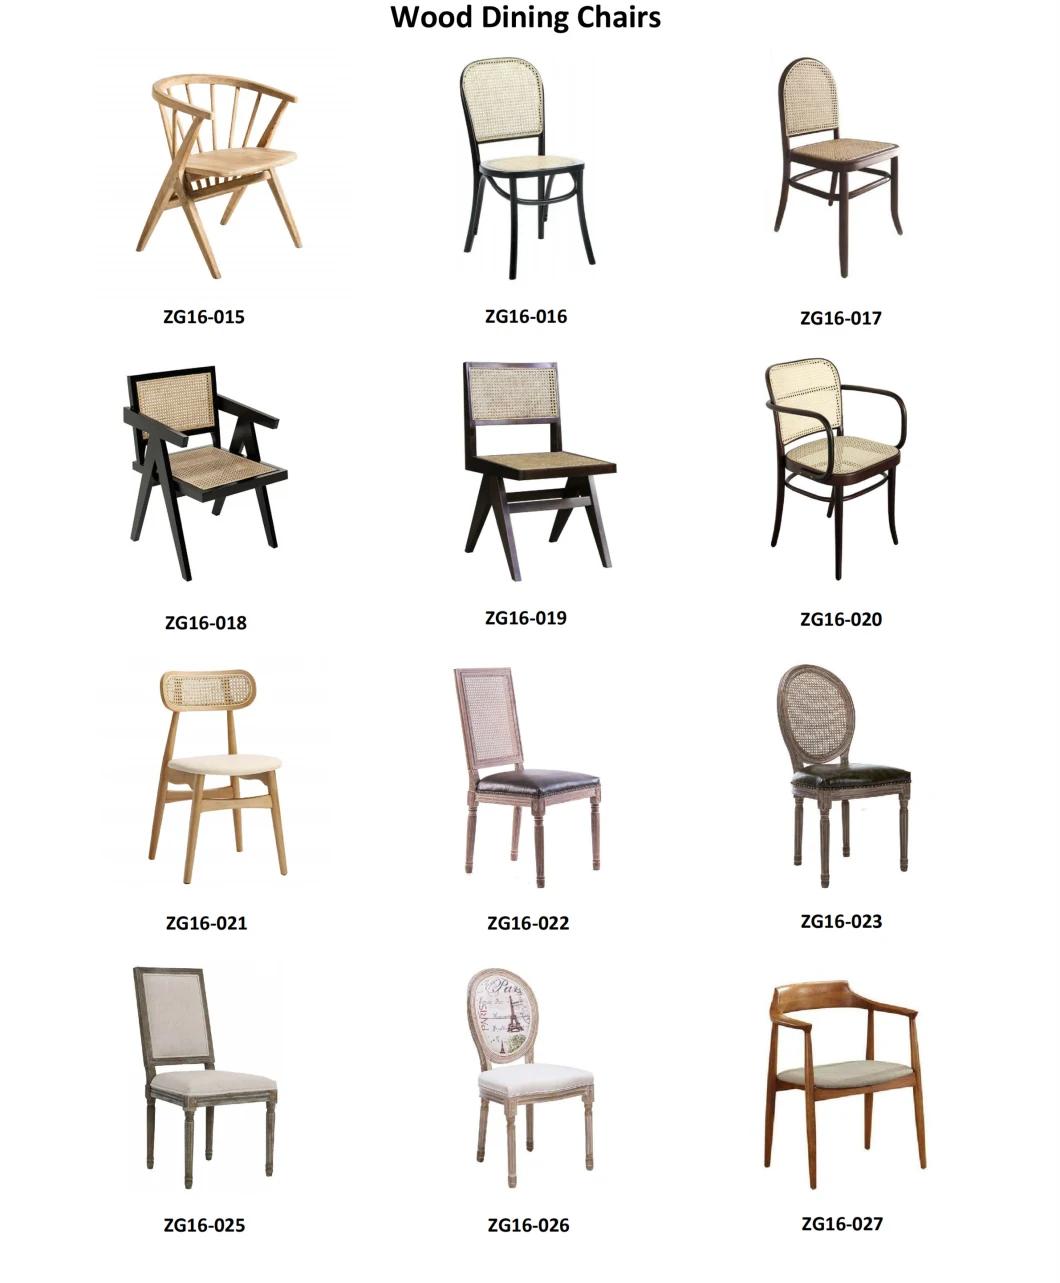 Hot Selling Wood Dining Chair (ZG16-015)